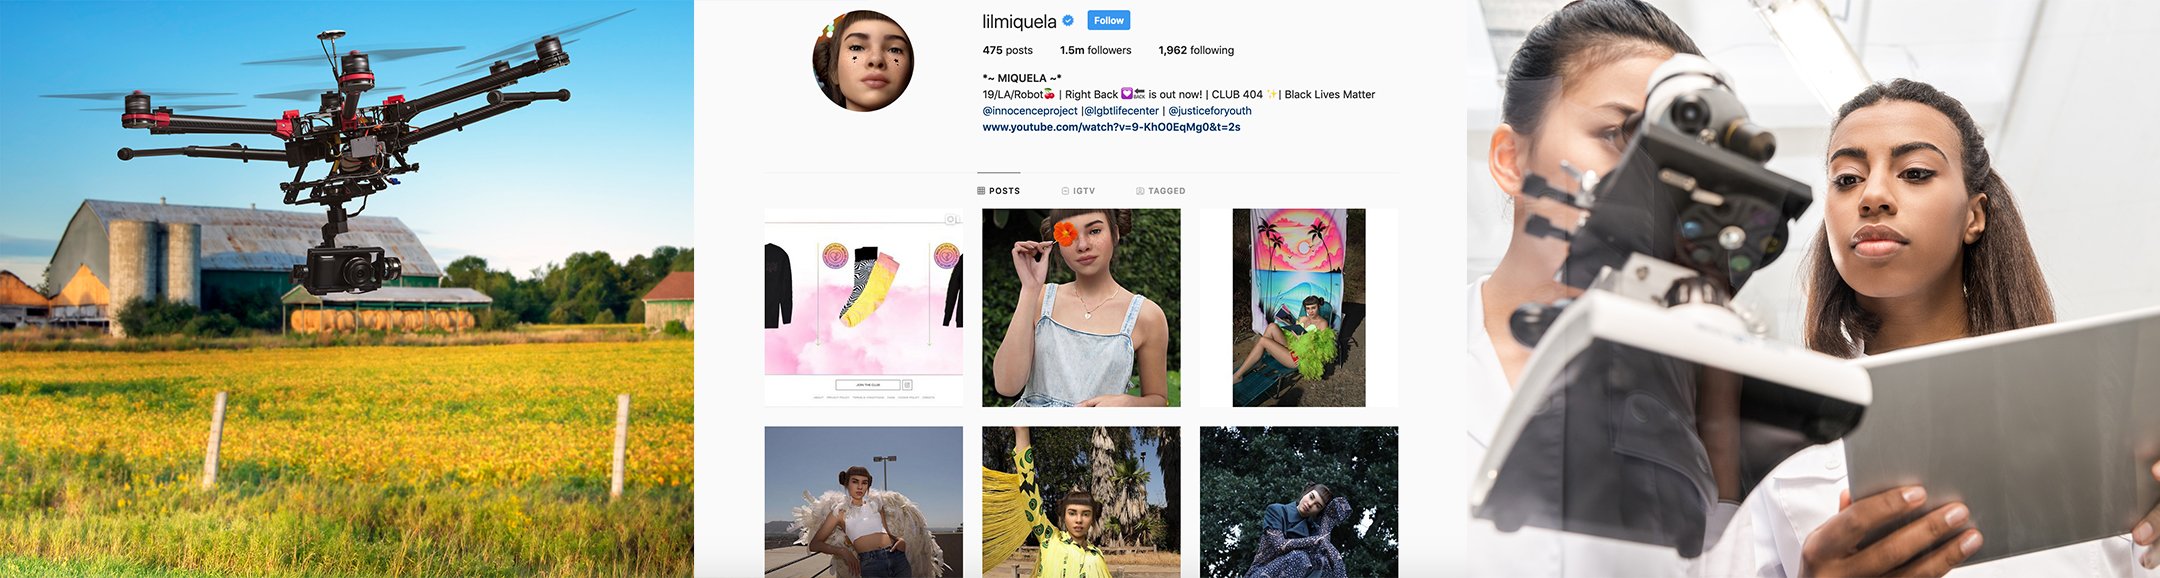 Drone monitoring crops, Instagram influencer Lil Miquela and scientists working in lab with AI